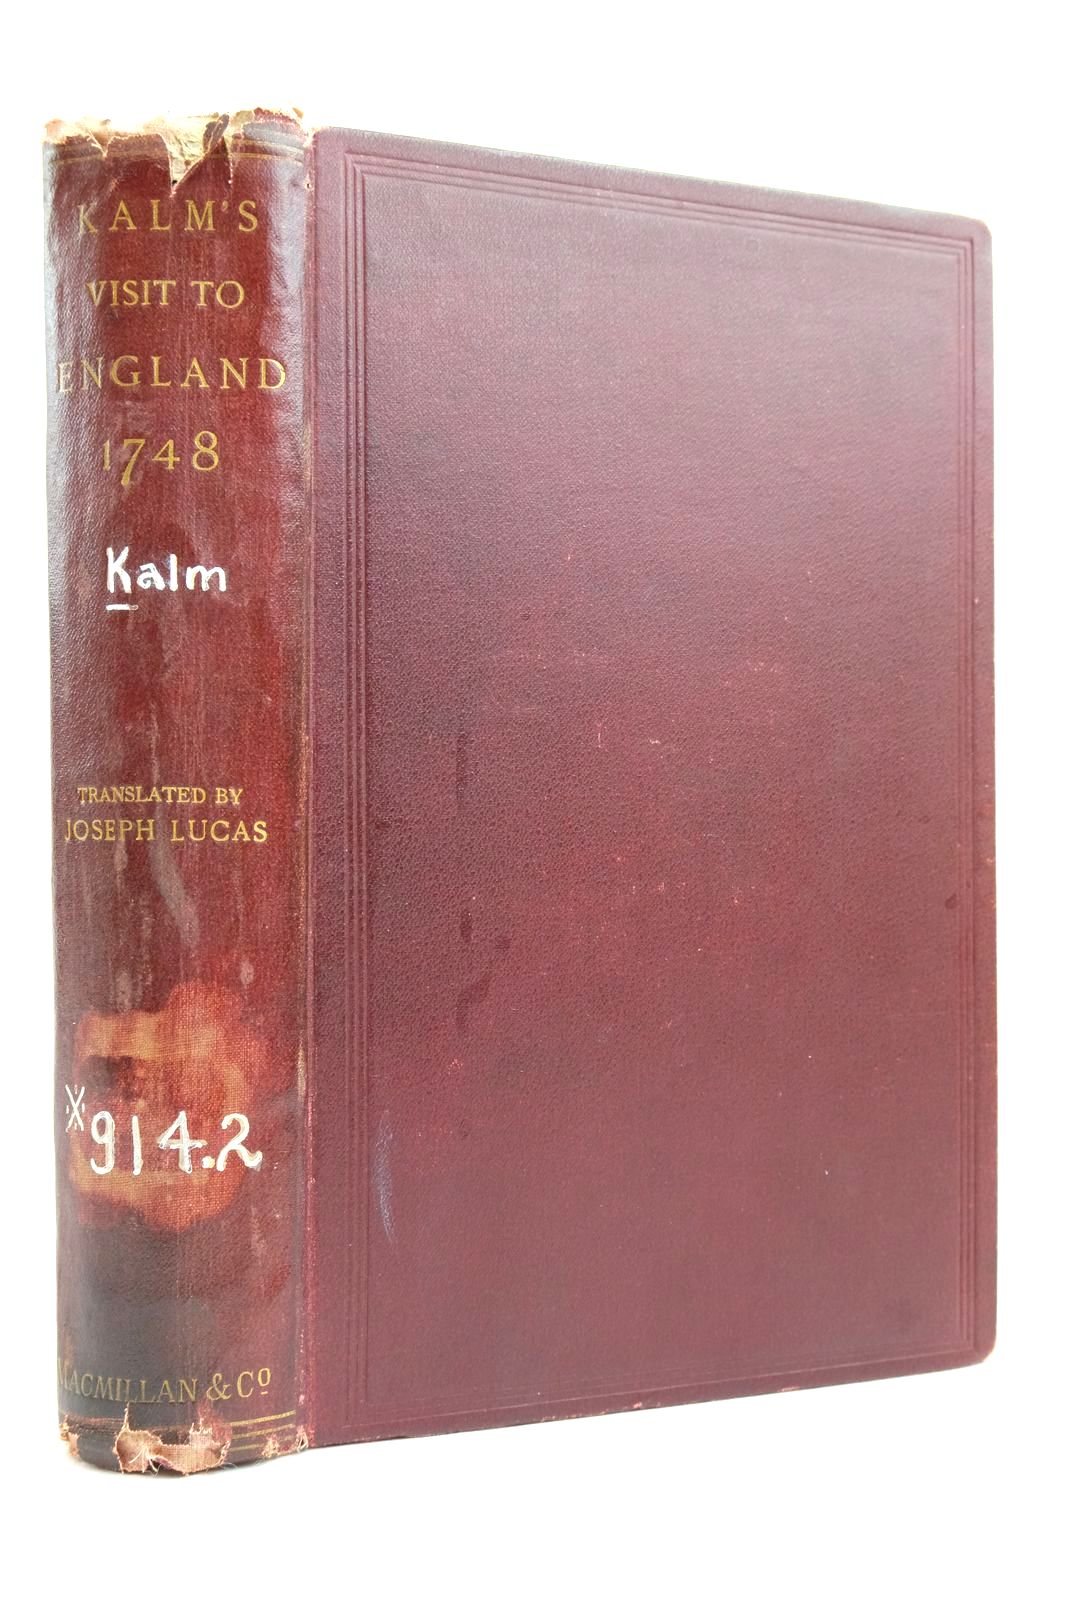 Photo of KALM'S ACCOUNT OF HIS VISIT TO ENGLAND ON HIS WAY TO AMERICA IN 1748 written by Kalm, Pehr Lucas, Joseph published by Macmillan &amp; Co. (STOCK CODE: 2135190)  for sale by Stella & Rose's Books